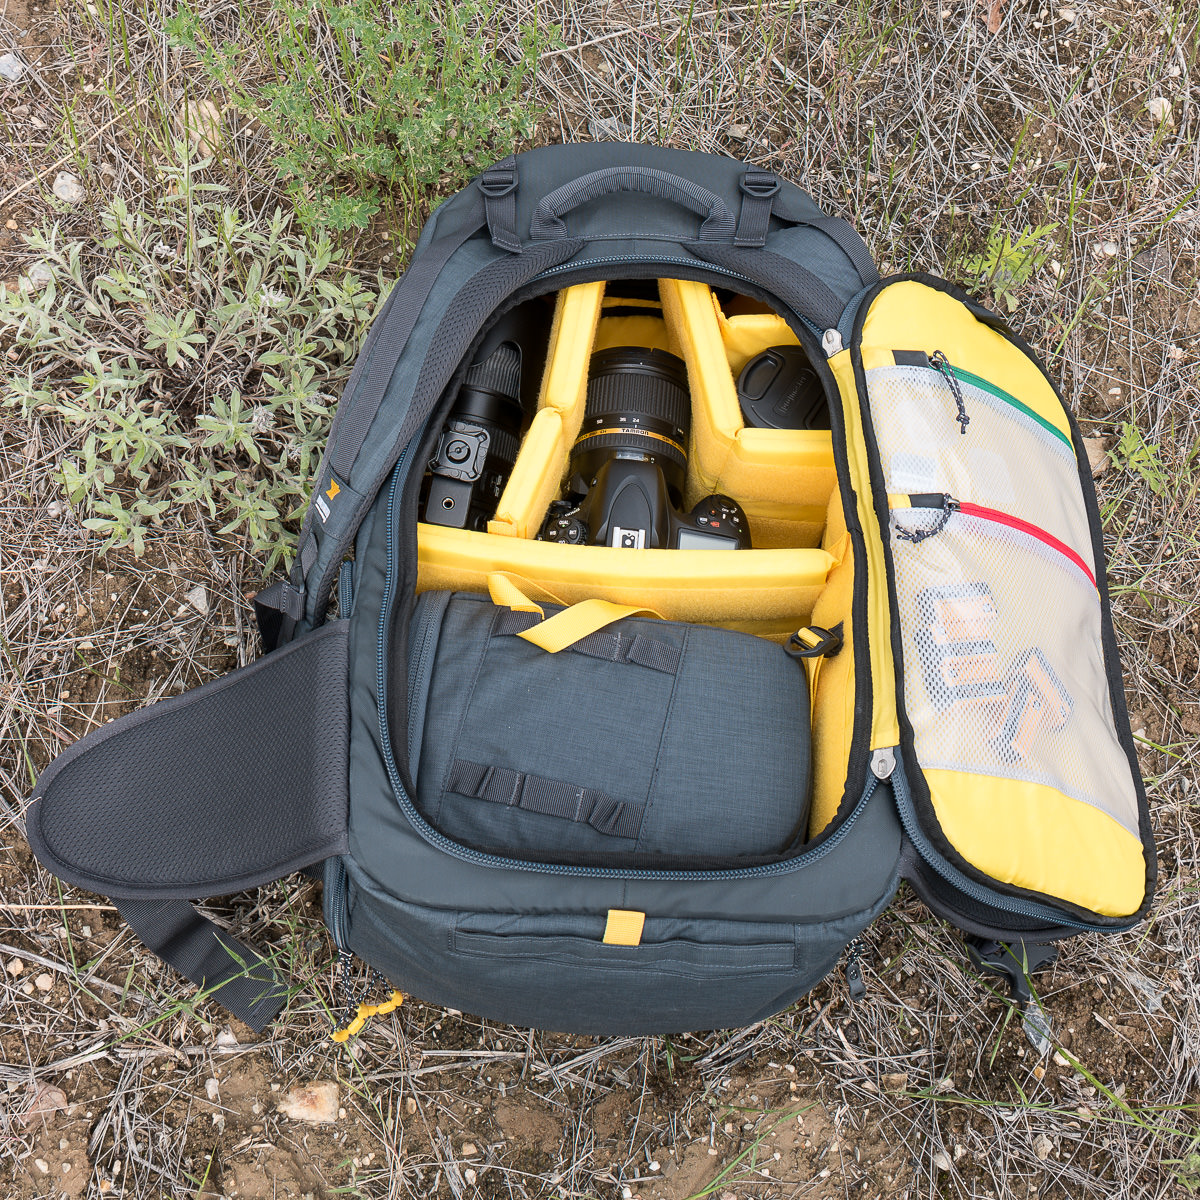 GOgroove camera bag review - THE DAINTY SQUID